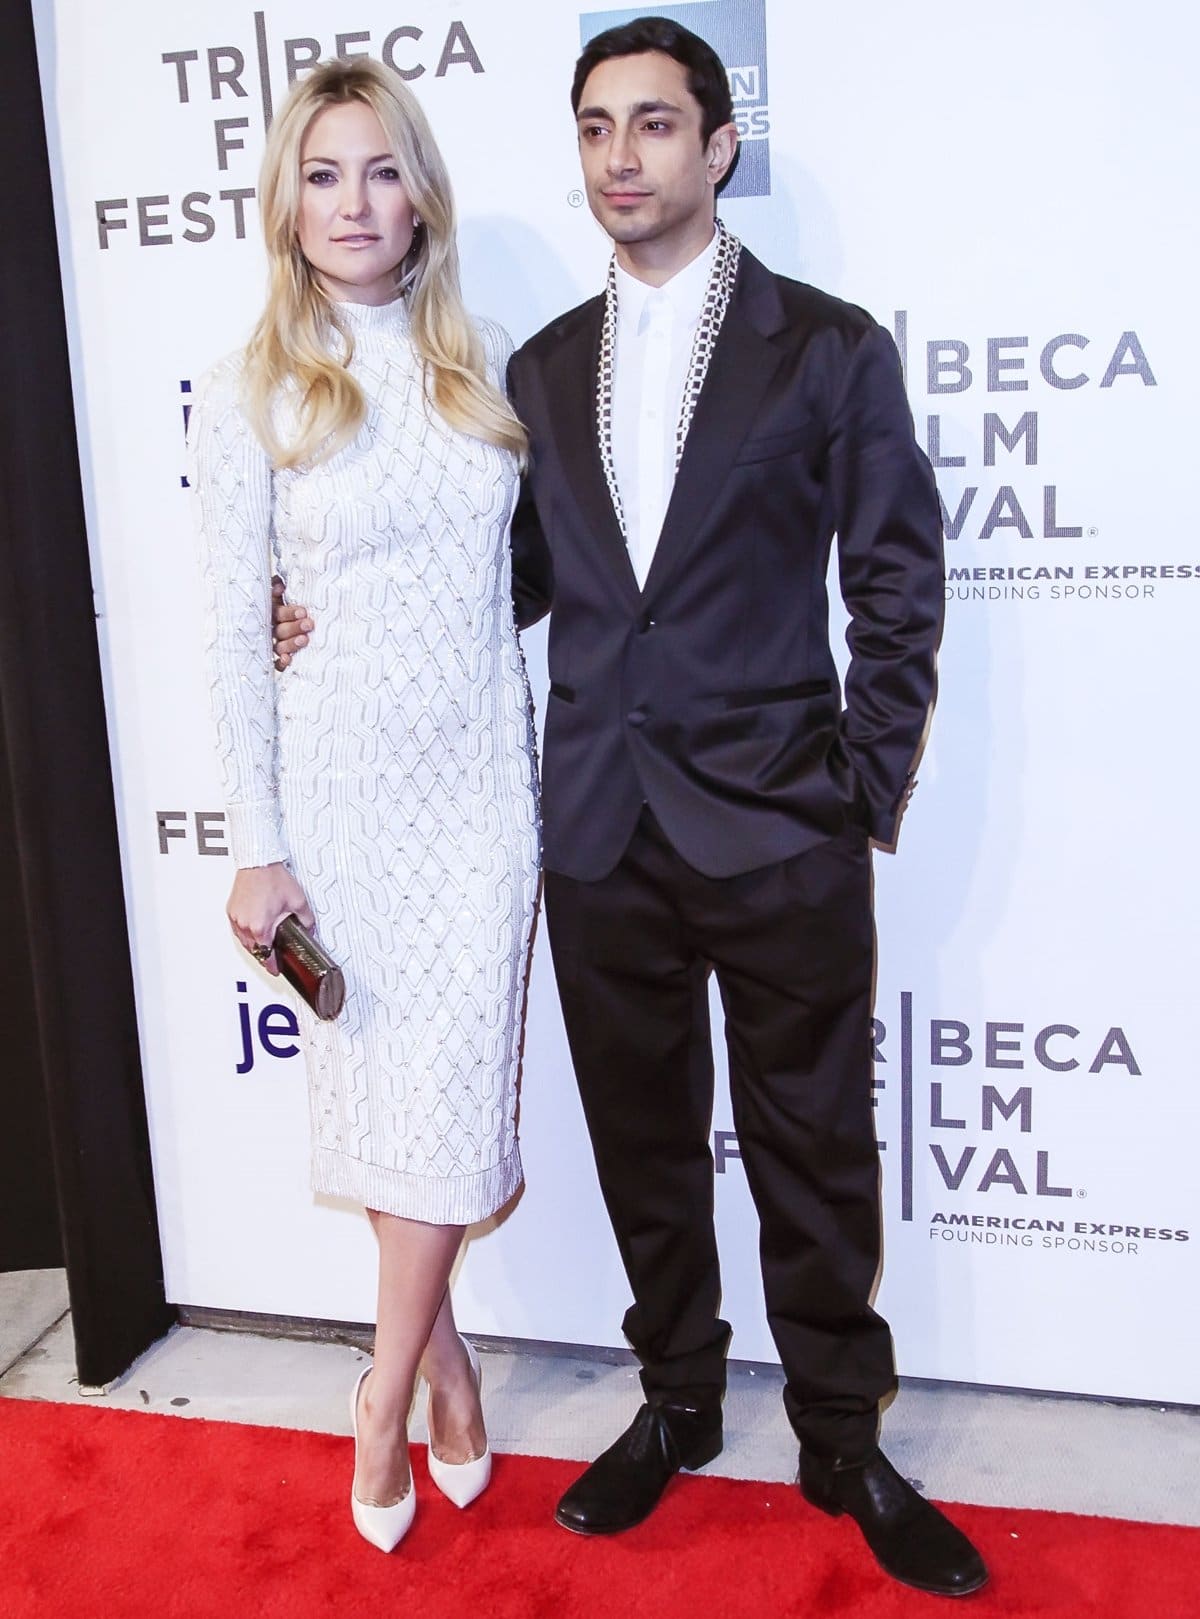 Riz Ahmed and Kate Hudson attend the screening of "The Reluctant Fundamentalist"